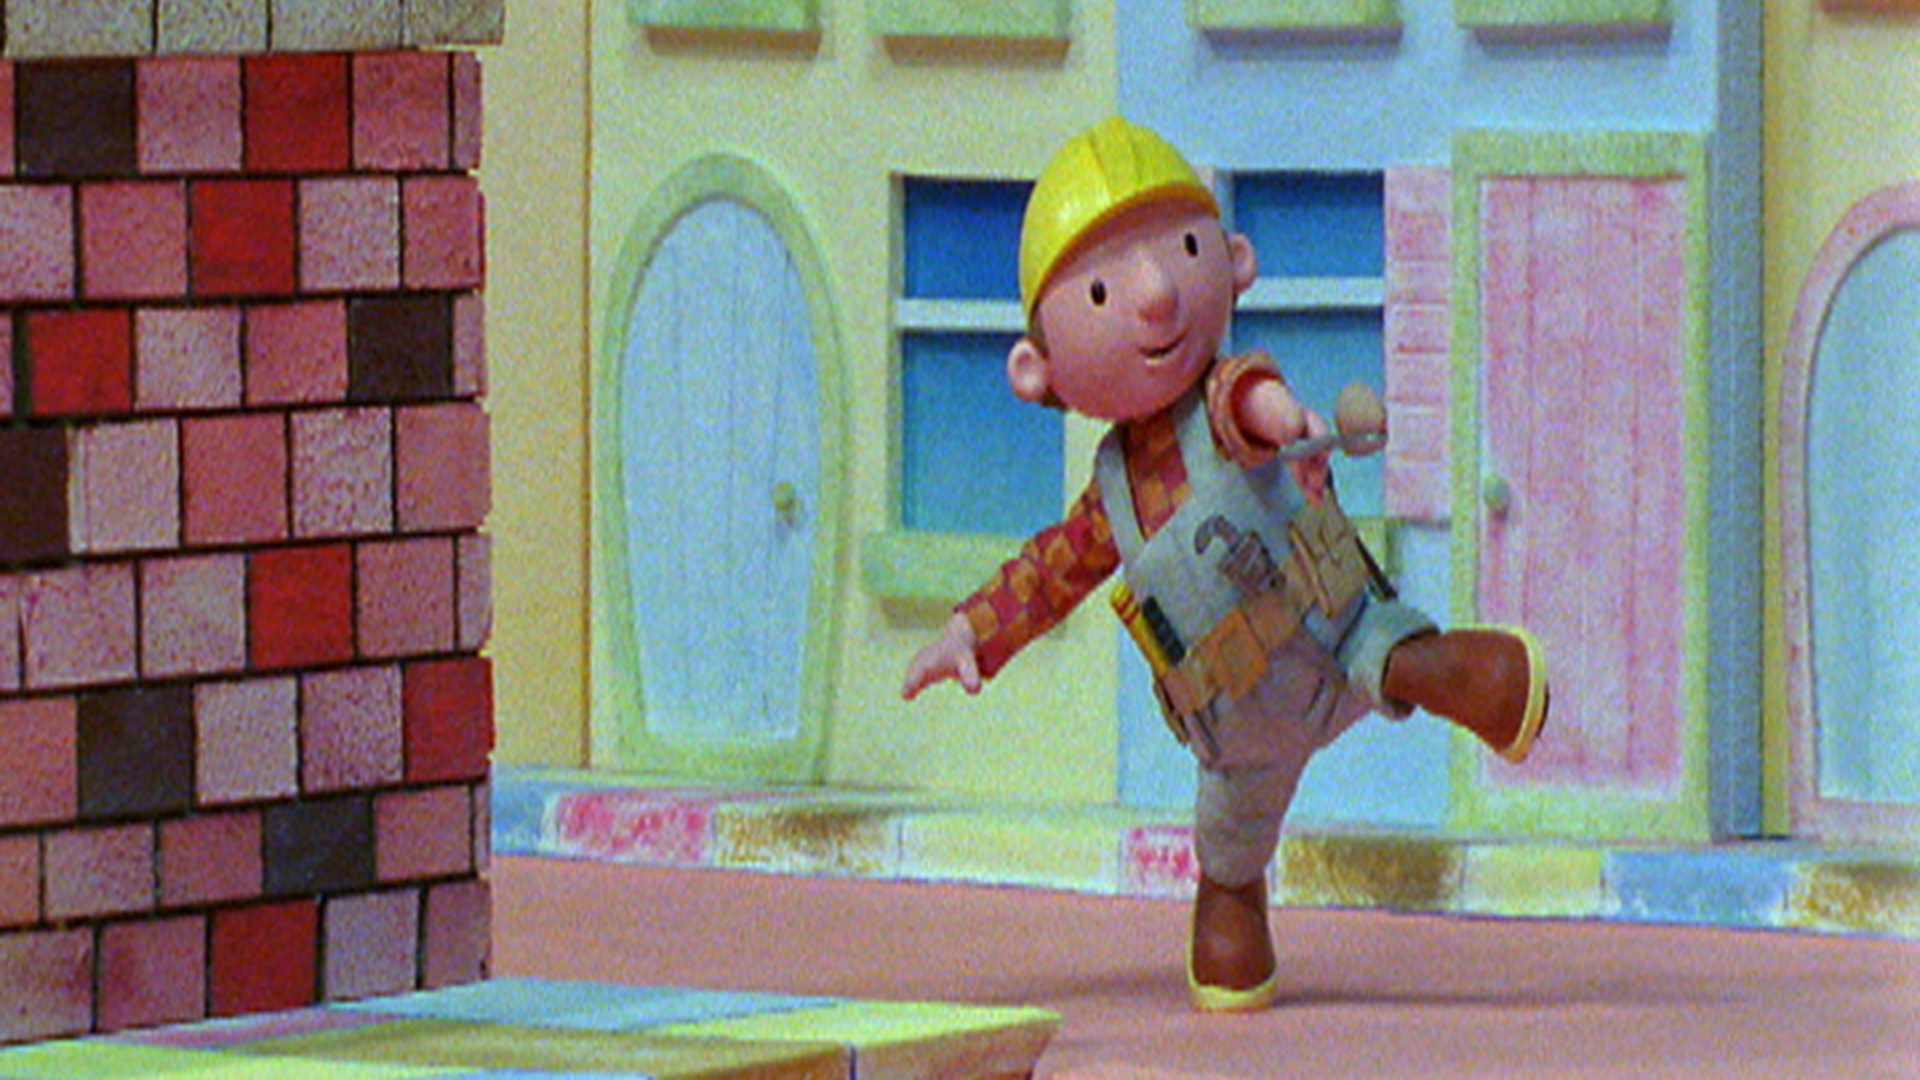 Watch Bob the Builder (Classic) Season 6 Episode 7: Bob's Egg And Spoon Race  - Full show on Paramount Plus